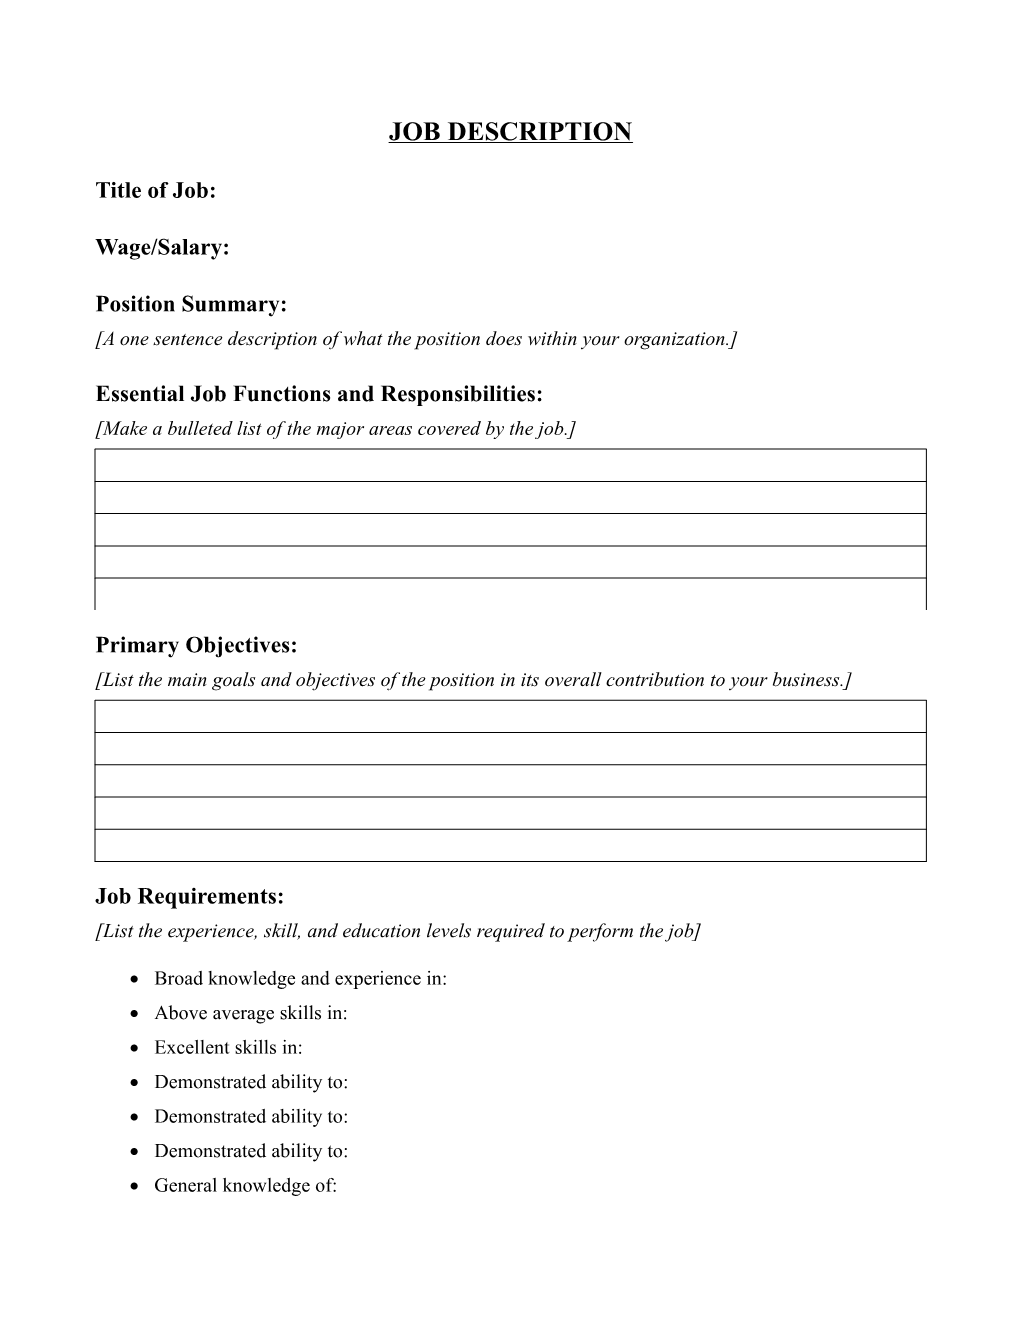 Essential Job Functions and Responsibilities